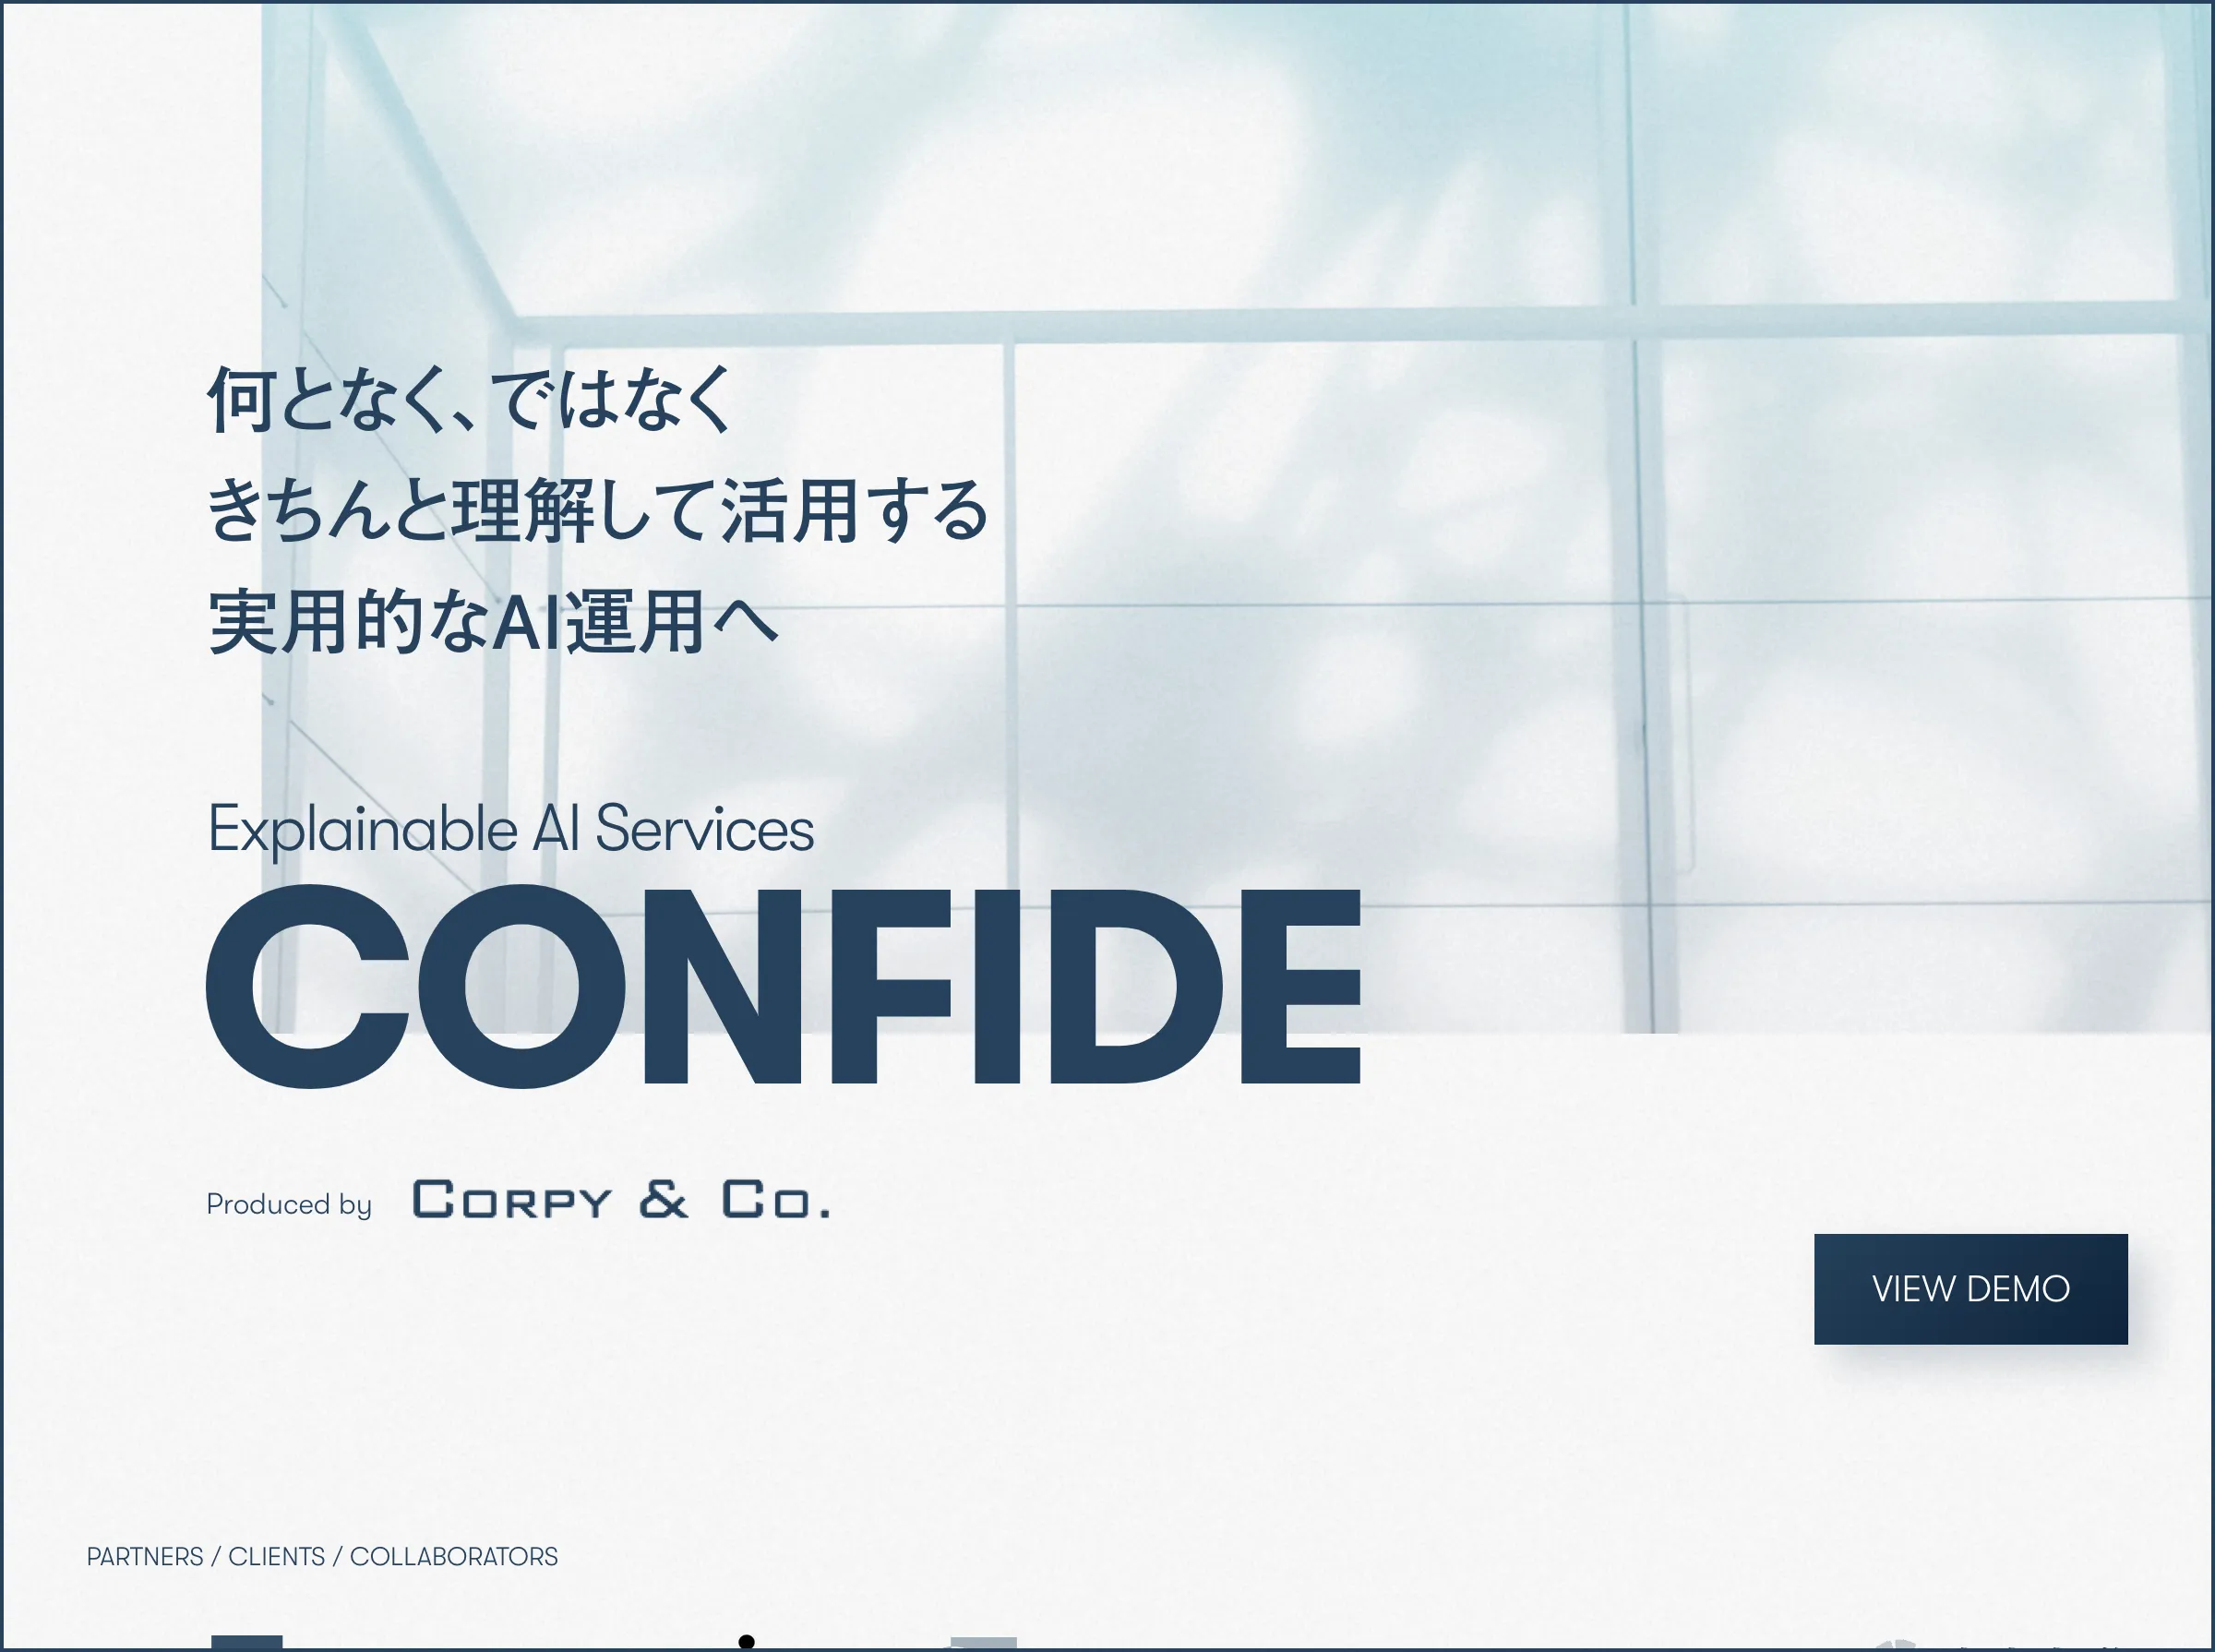 CONFIDE for Factory(株式会社コーピー)